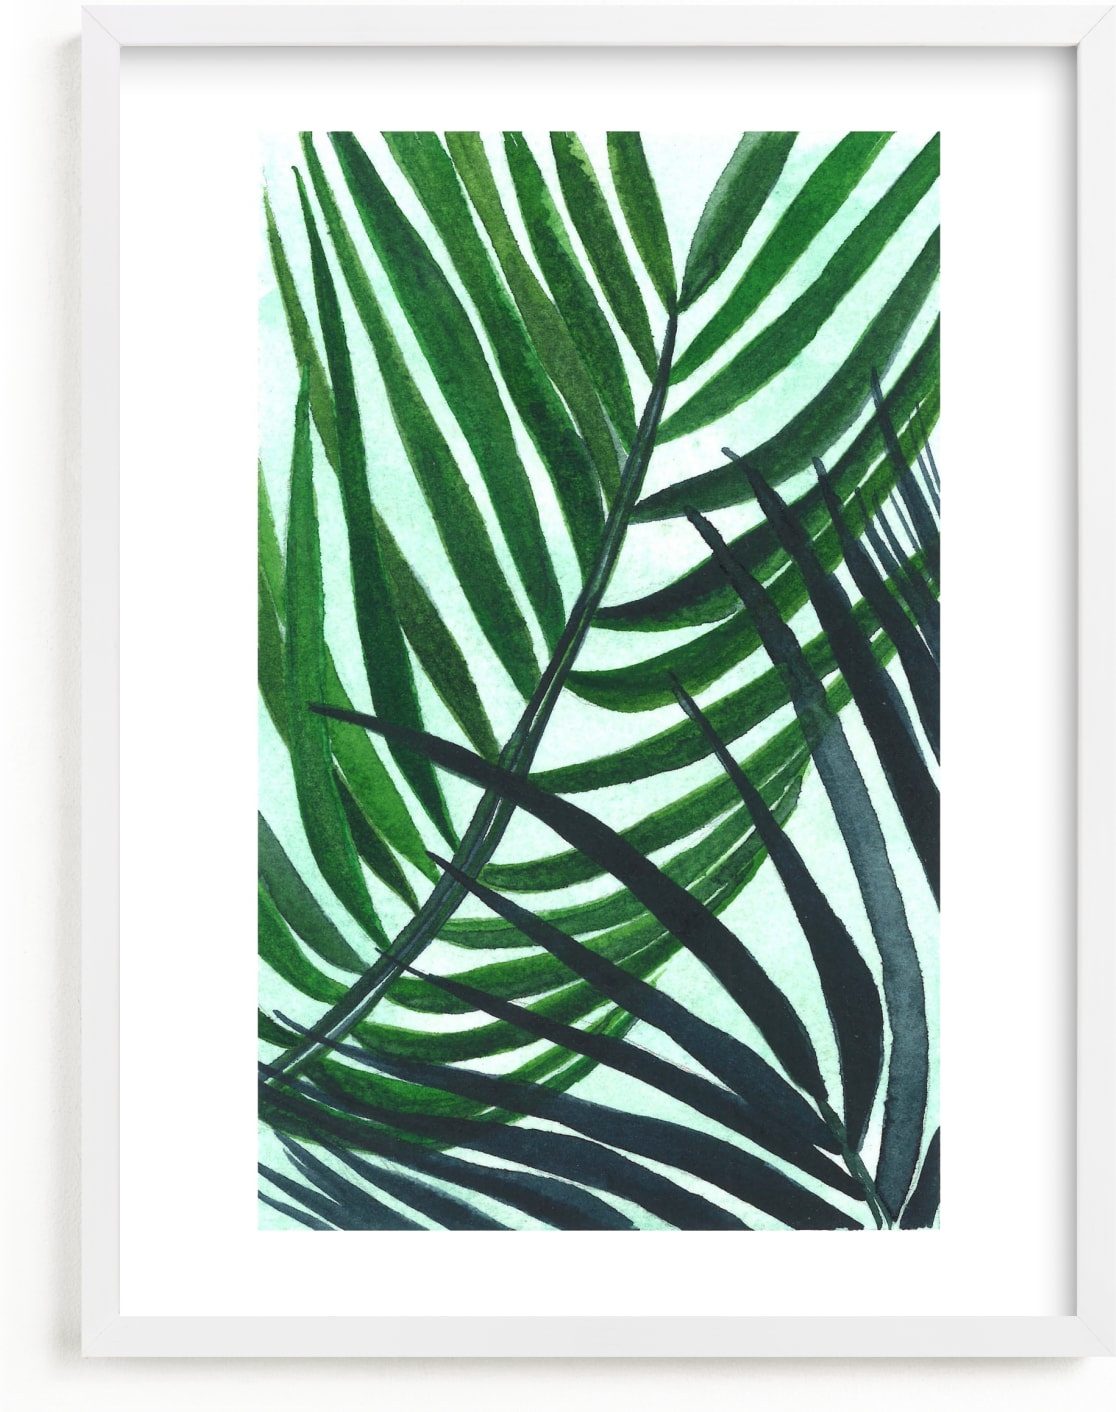 This is a blue kids wall art by Kara Aina called Crossed Palms.